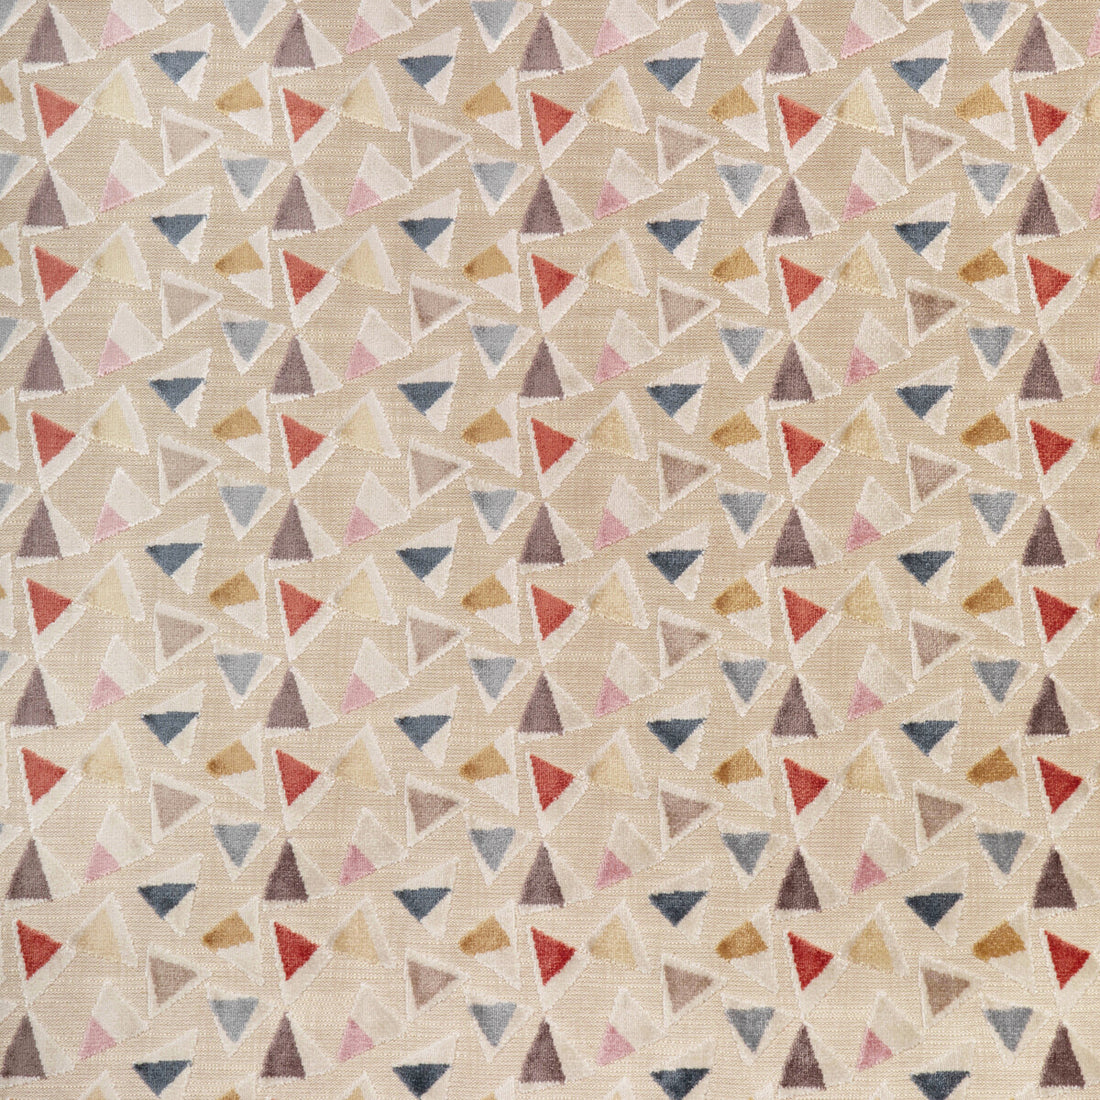 Trio Tango fabric in mirage color - pattern 36887.516.0 - by Kravet Design in the Mid-Century Modern collection